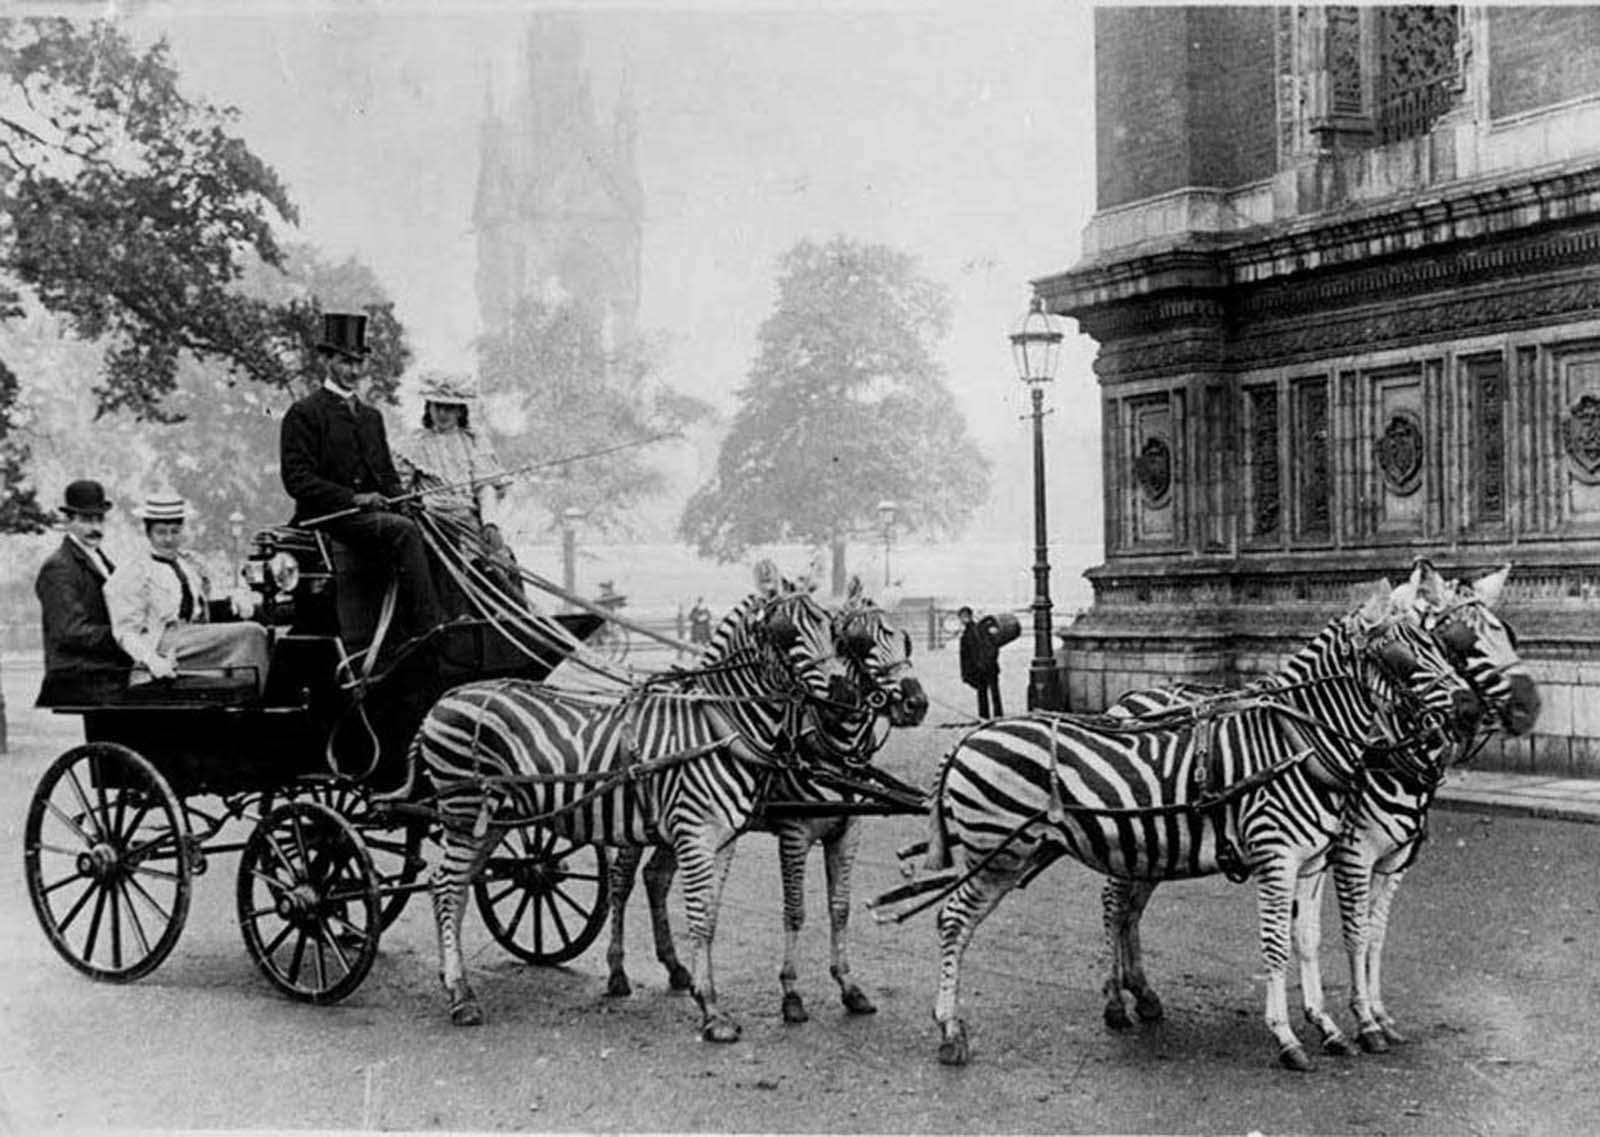 In the late 19th century, it was fashionable to train zebras to pull carriages. Pictured is Mr. Hardy, who was a noted horserider and trainer. 1898.jpg